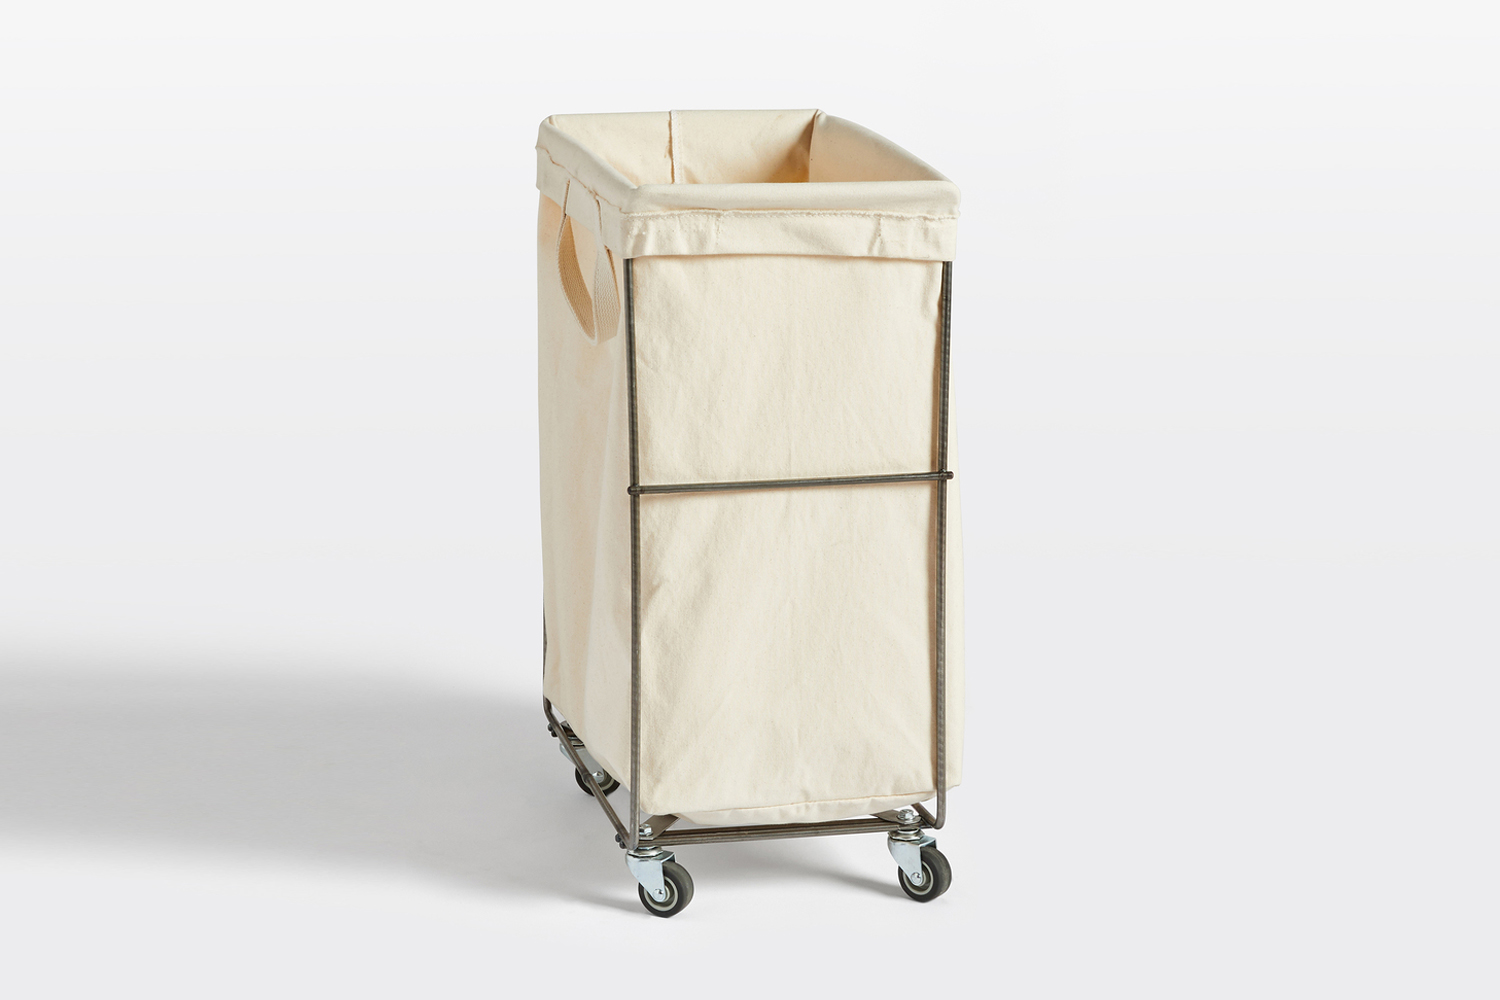 the special design of steele canvas laundry system at rejuvenation is $175 fo 18